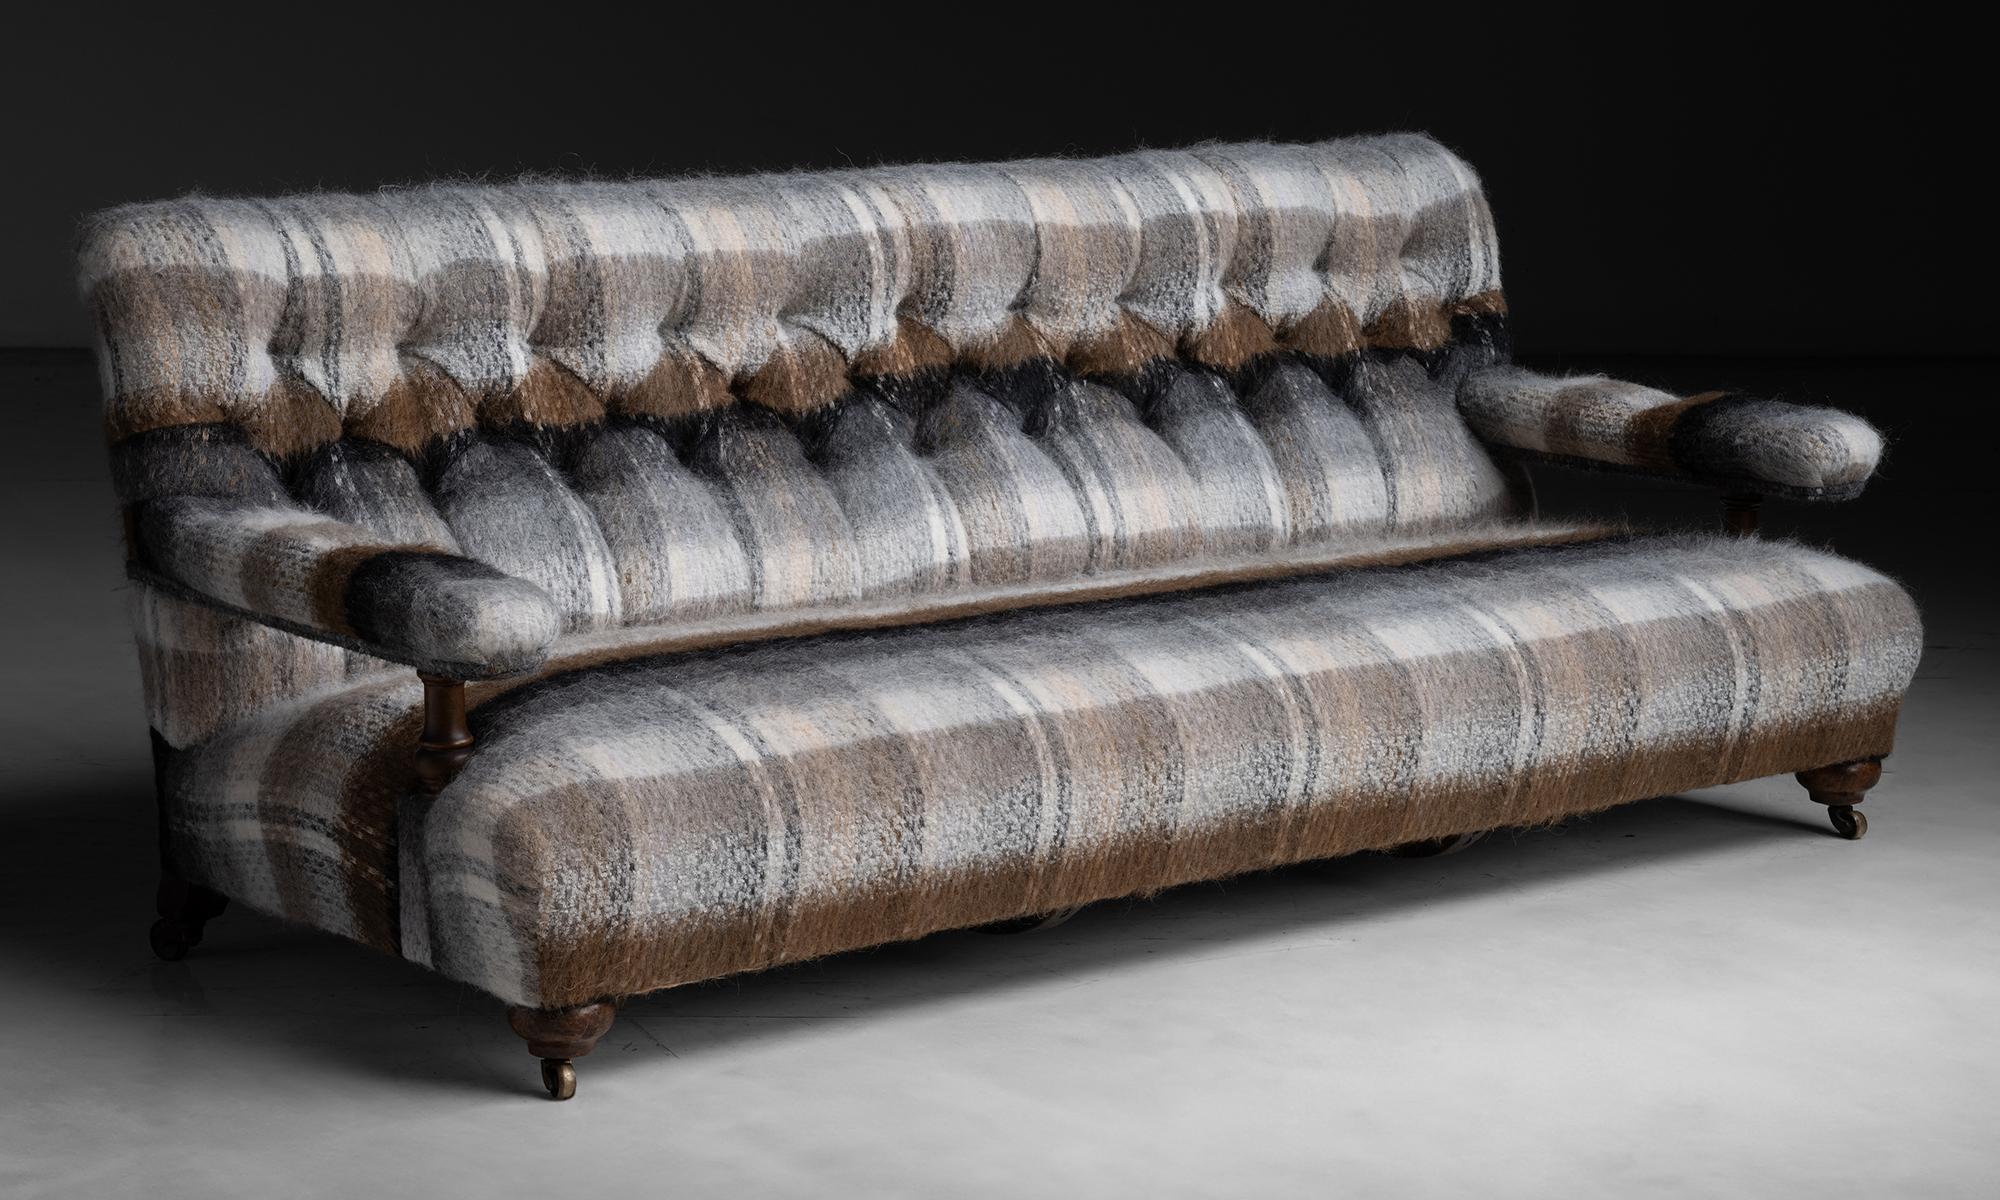 Howard & Sons Sofa in Pierre Frey Wool Plaid

England circa 1880

Open arm sofa, newly upholstered in Wool / Alpaca / Mohair blend by Pierre Frey.

75.5”L x 34”d x 29.5”h x 12”seat